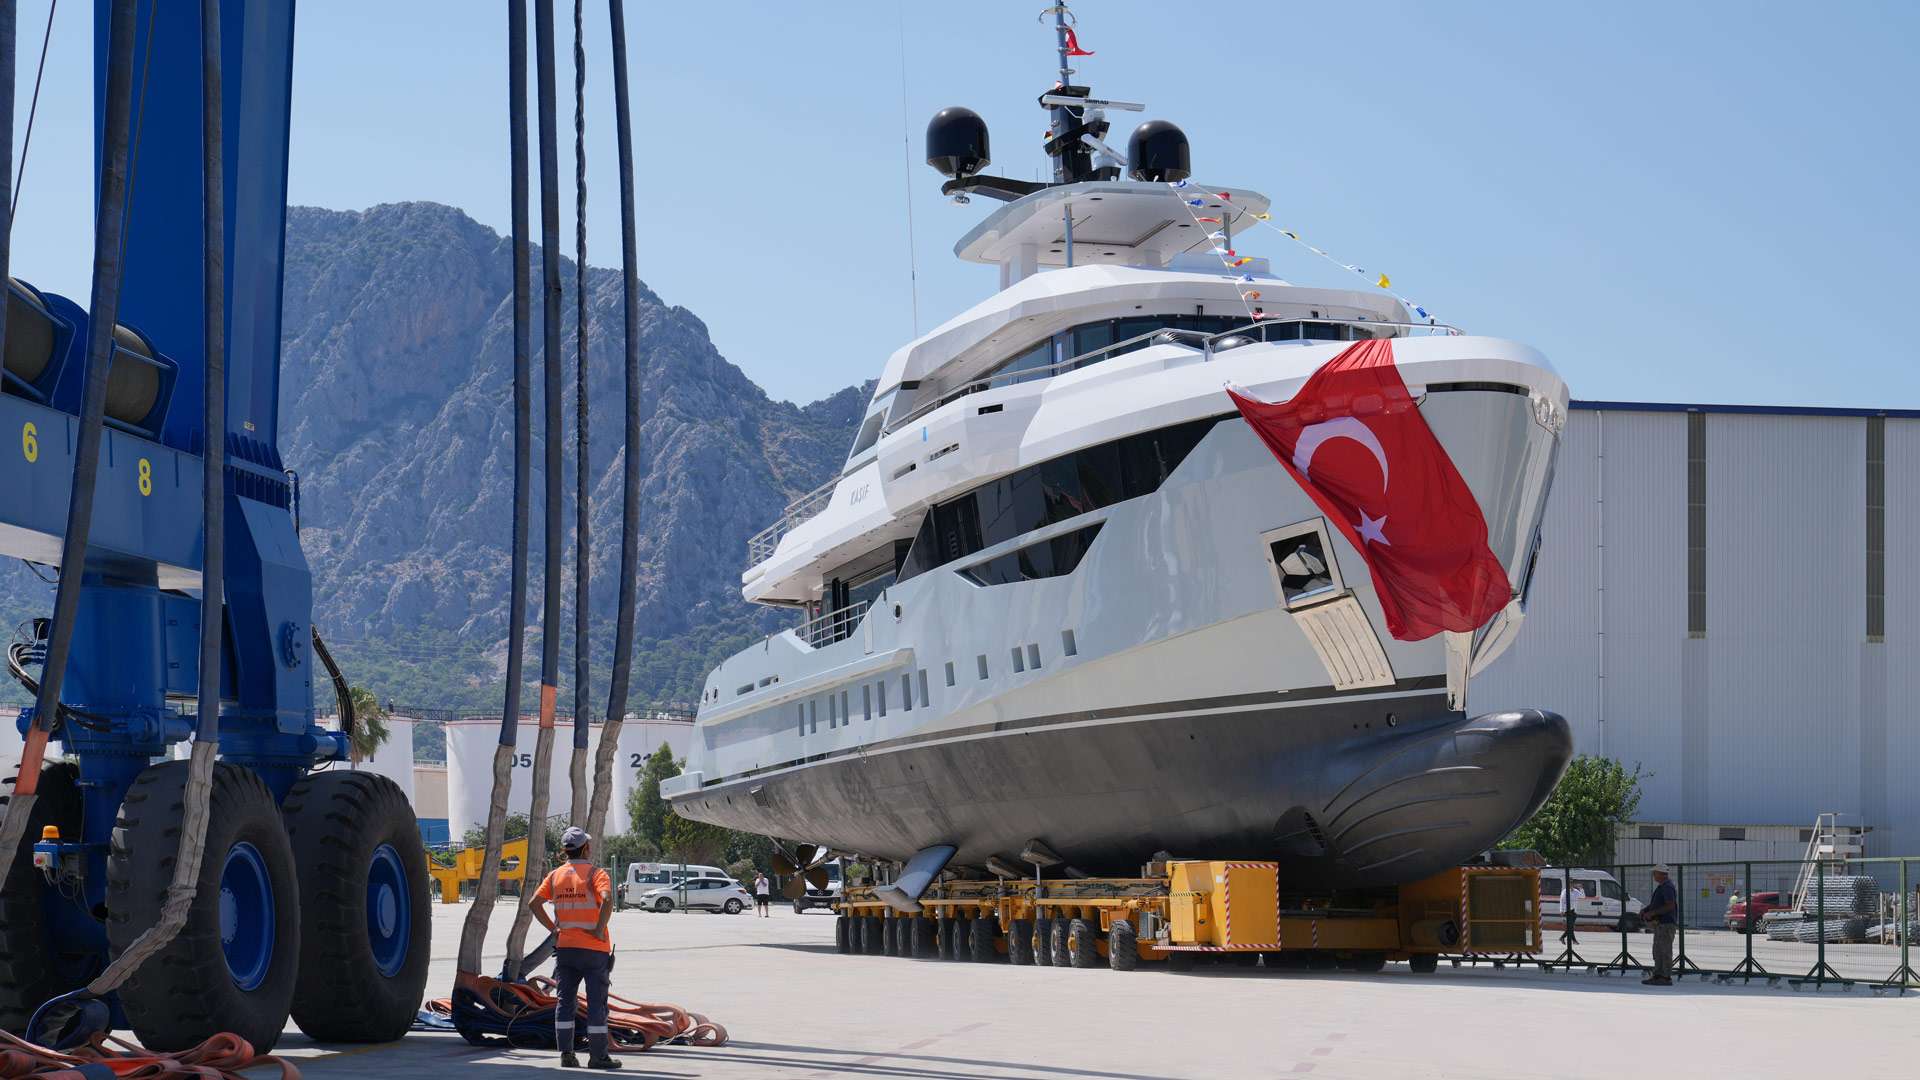 An explorer yacht in the new facility built in the Antalya Free Zone